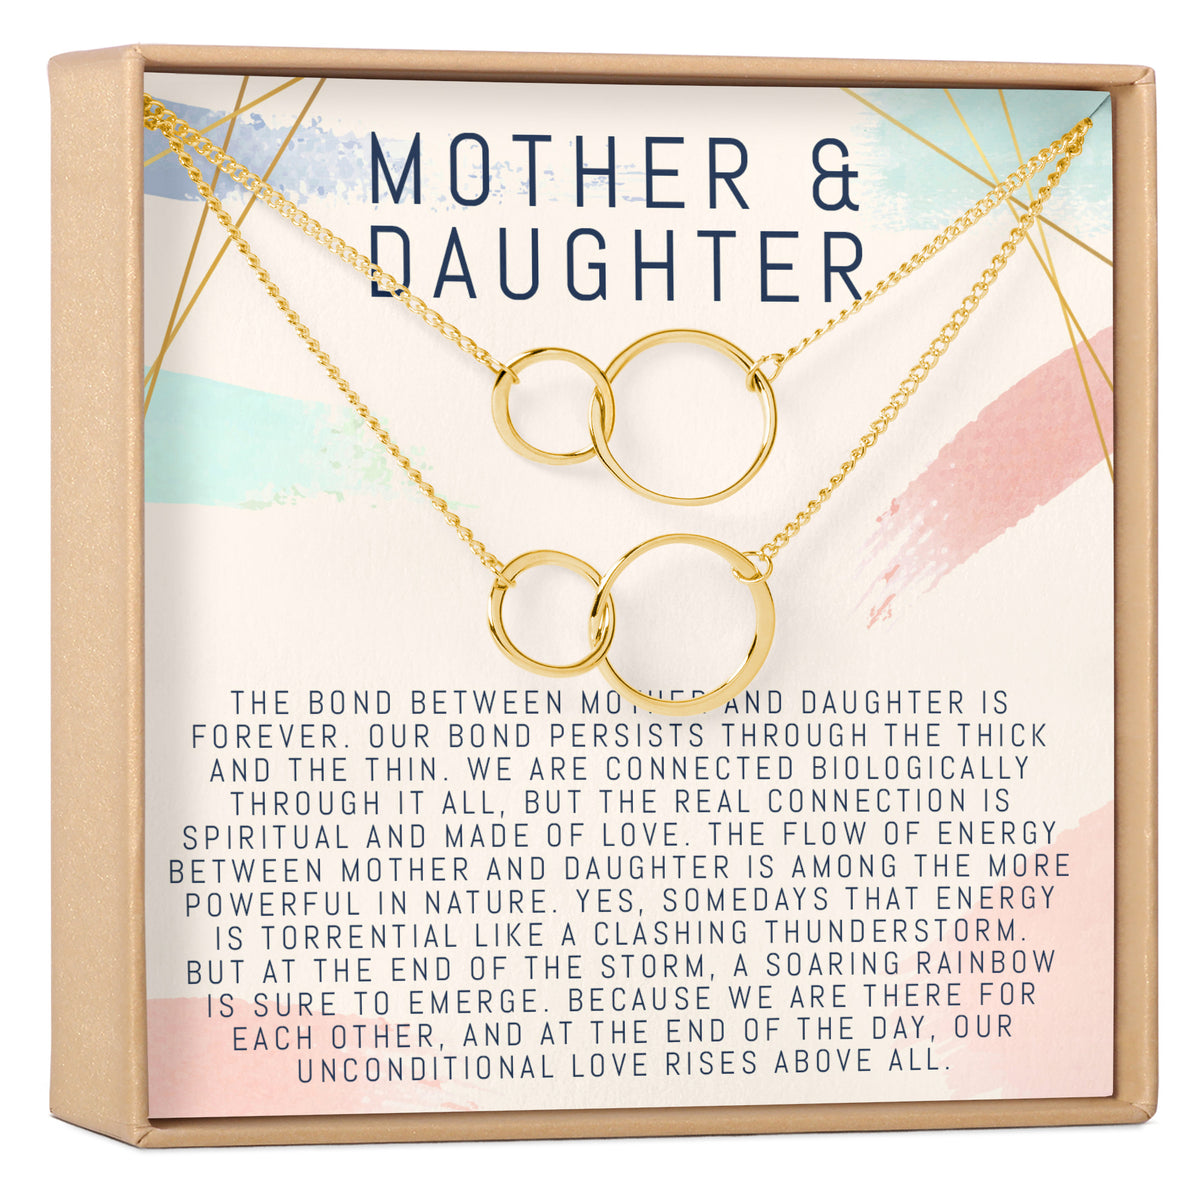 2pc MOM & DAUGHTER Necklace Set Mother Daughter Necklaces Mom Daughter  Gifts | eBay